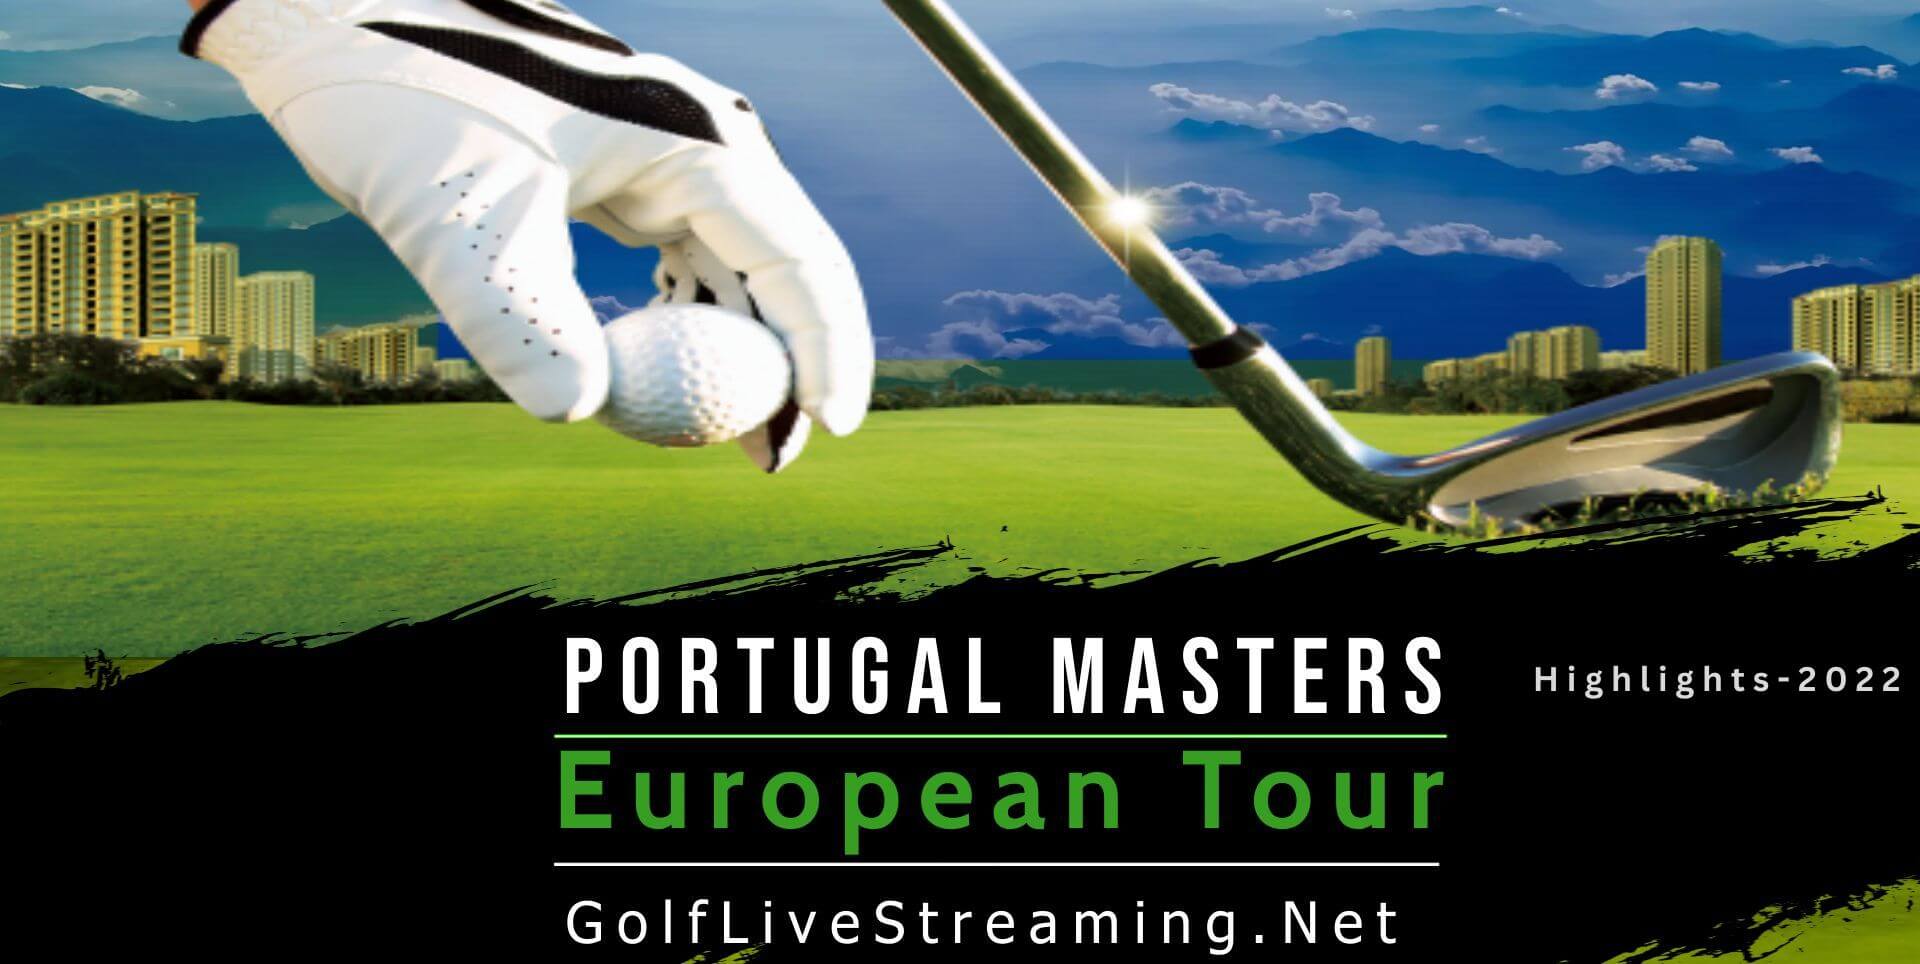 Portugal Masters Round 2 Highlights 202 European Tour